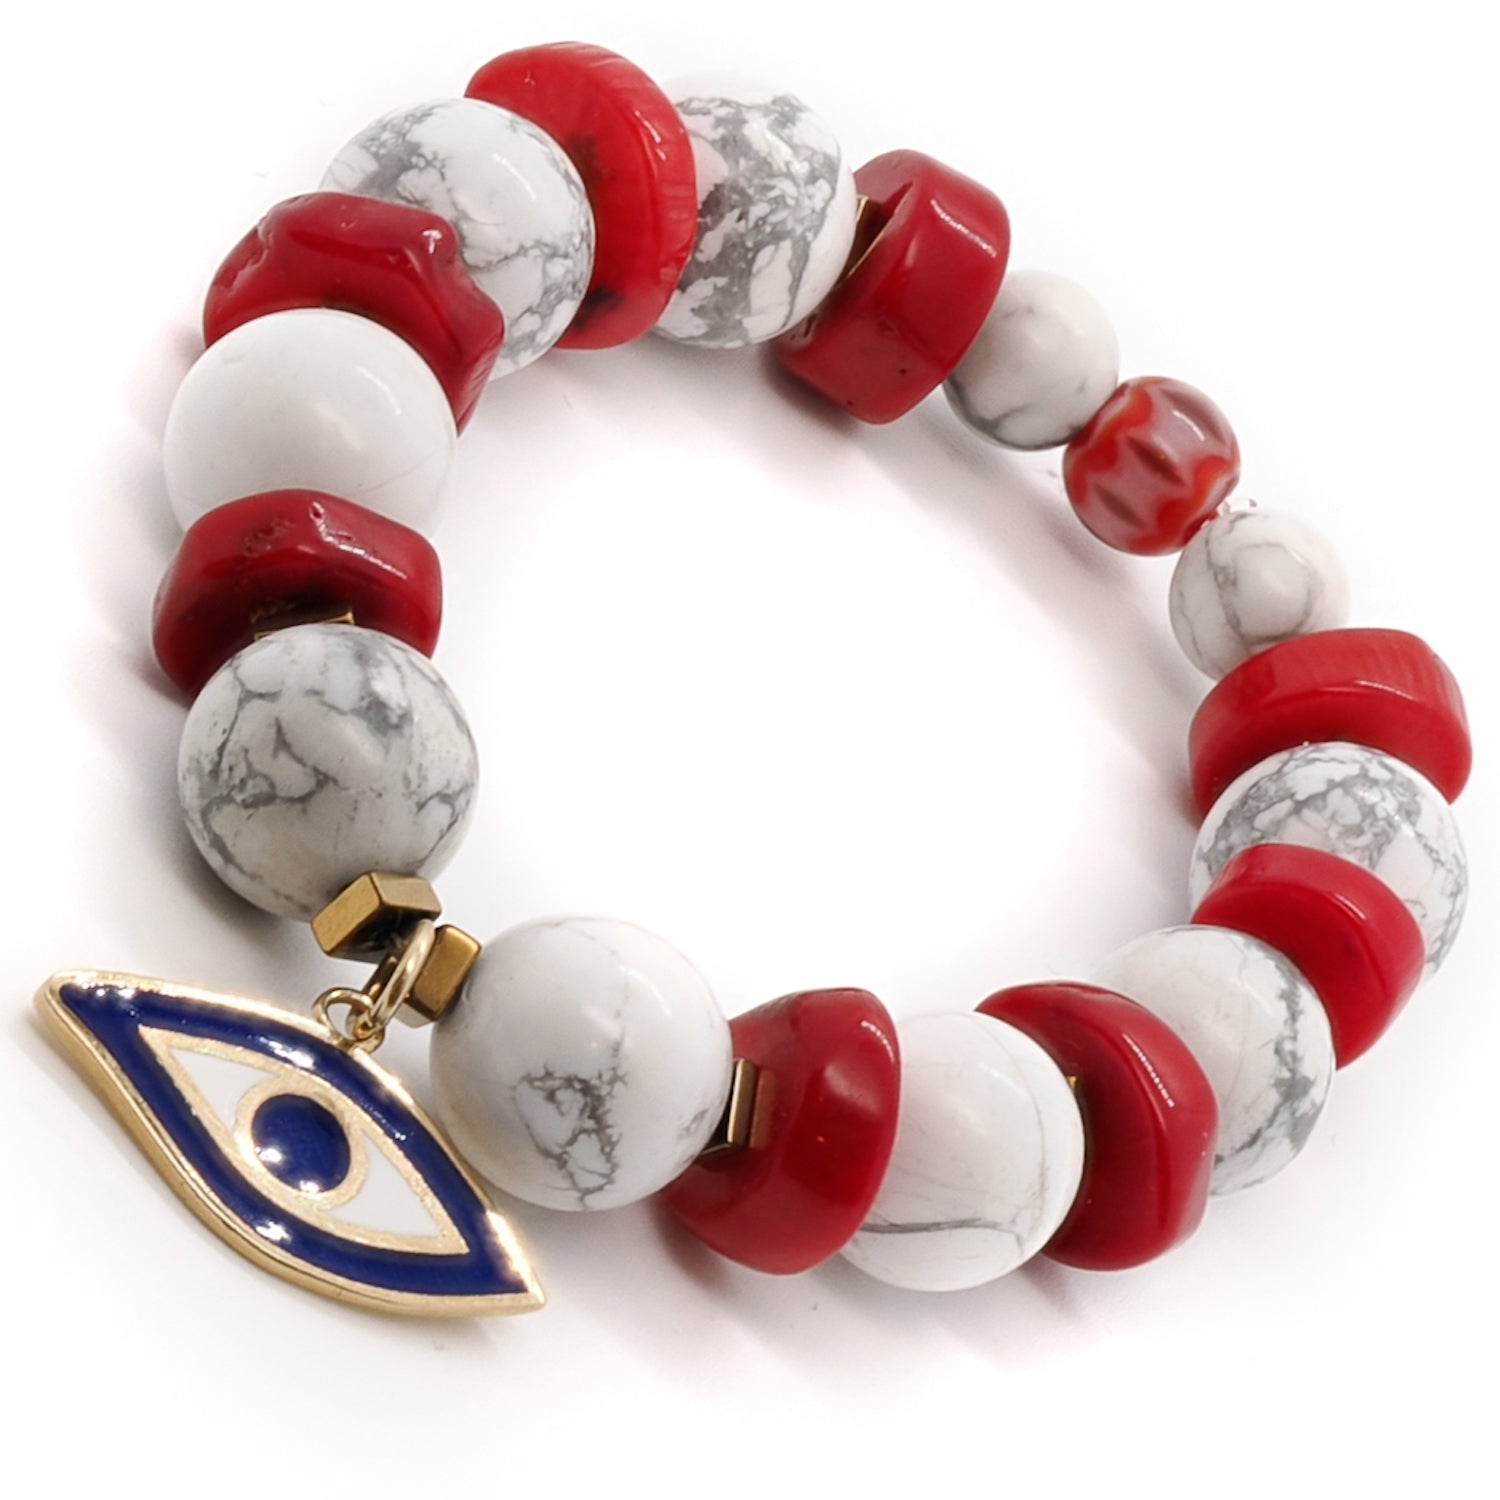 The Spiritual Beads Evil Eye Bracelet combines the beauty of white howlite, red coral, and a sterling silver evil eye charm.